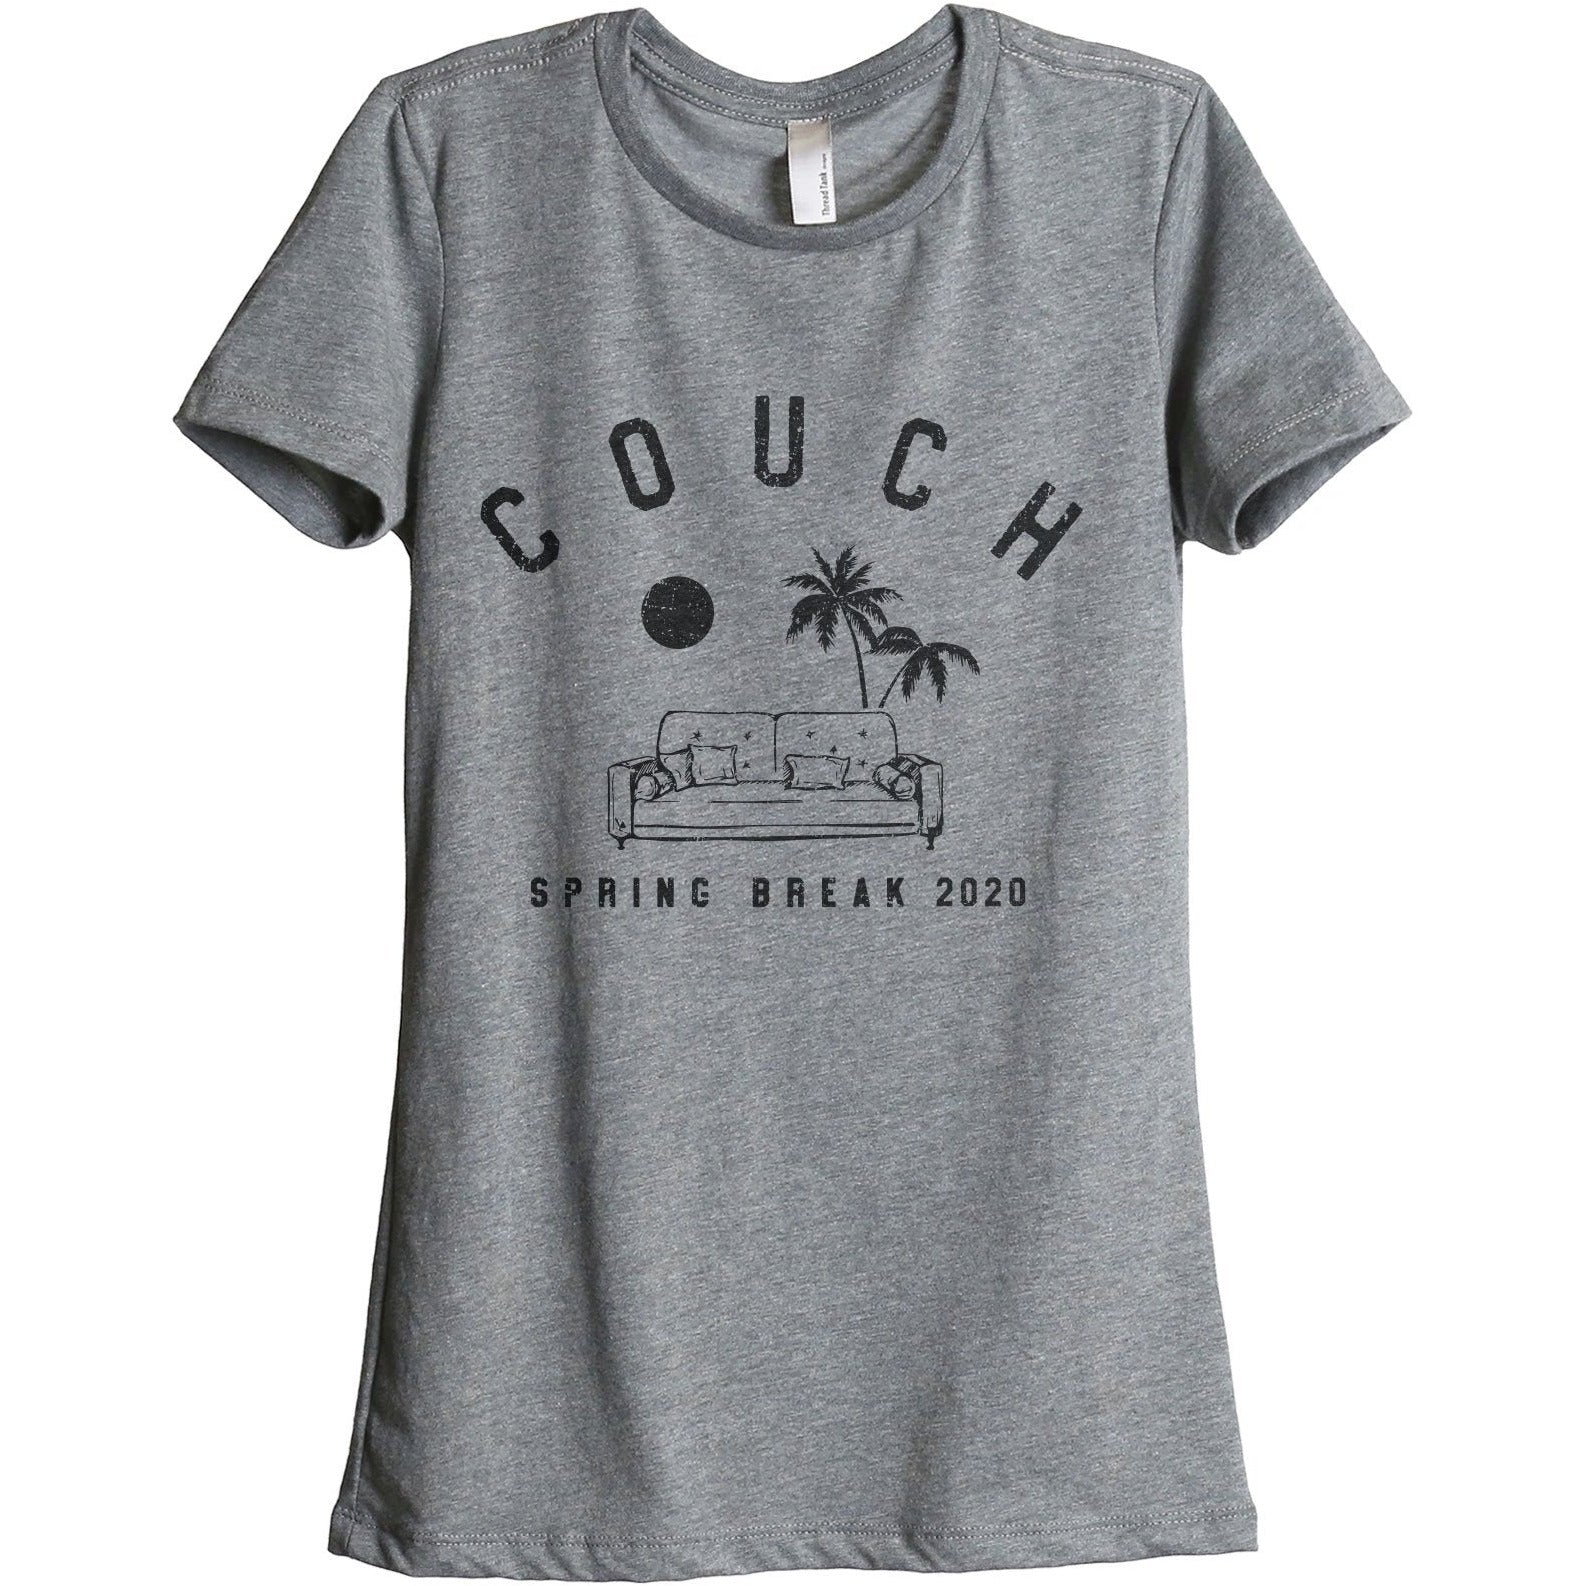 Couch Spring Break Women's Relaxed Crewneck T-Shirt Top Tee Heather Grey